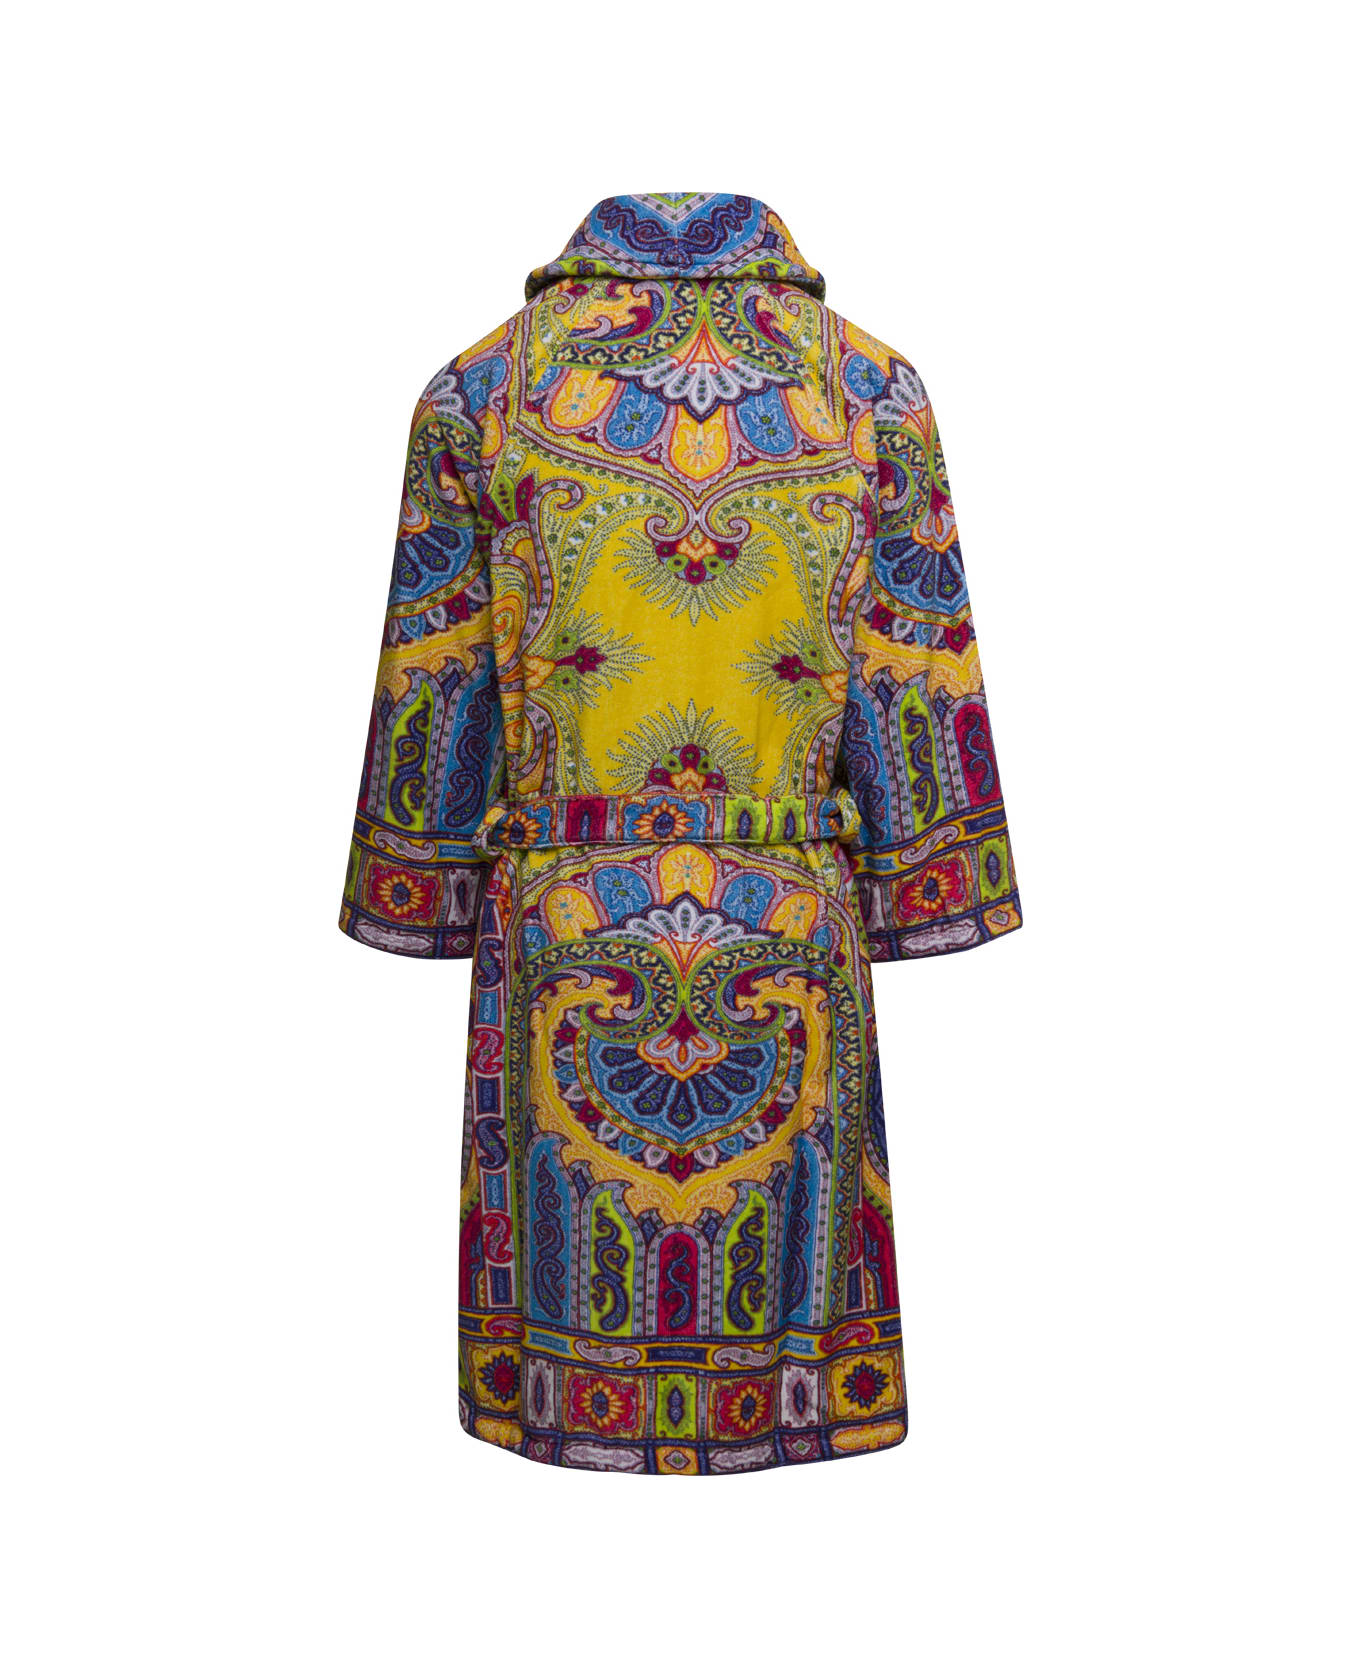 Etro 'new Tradition' Multicolor Bath Robe With Pailsey Motif Home - Yellow タオル